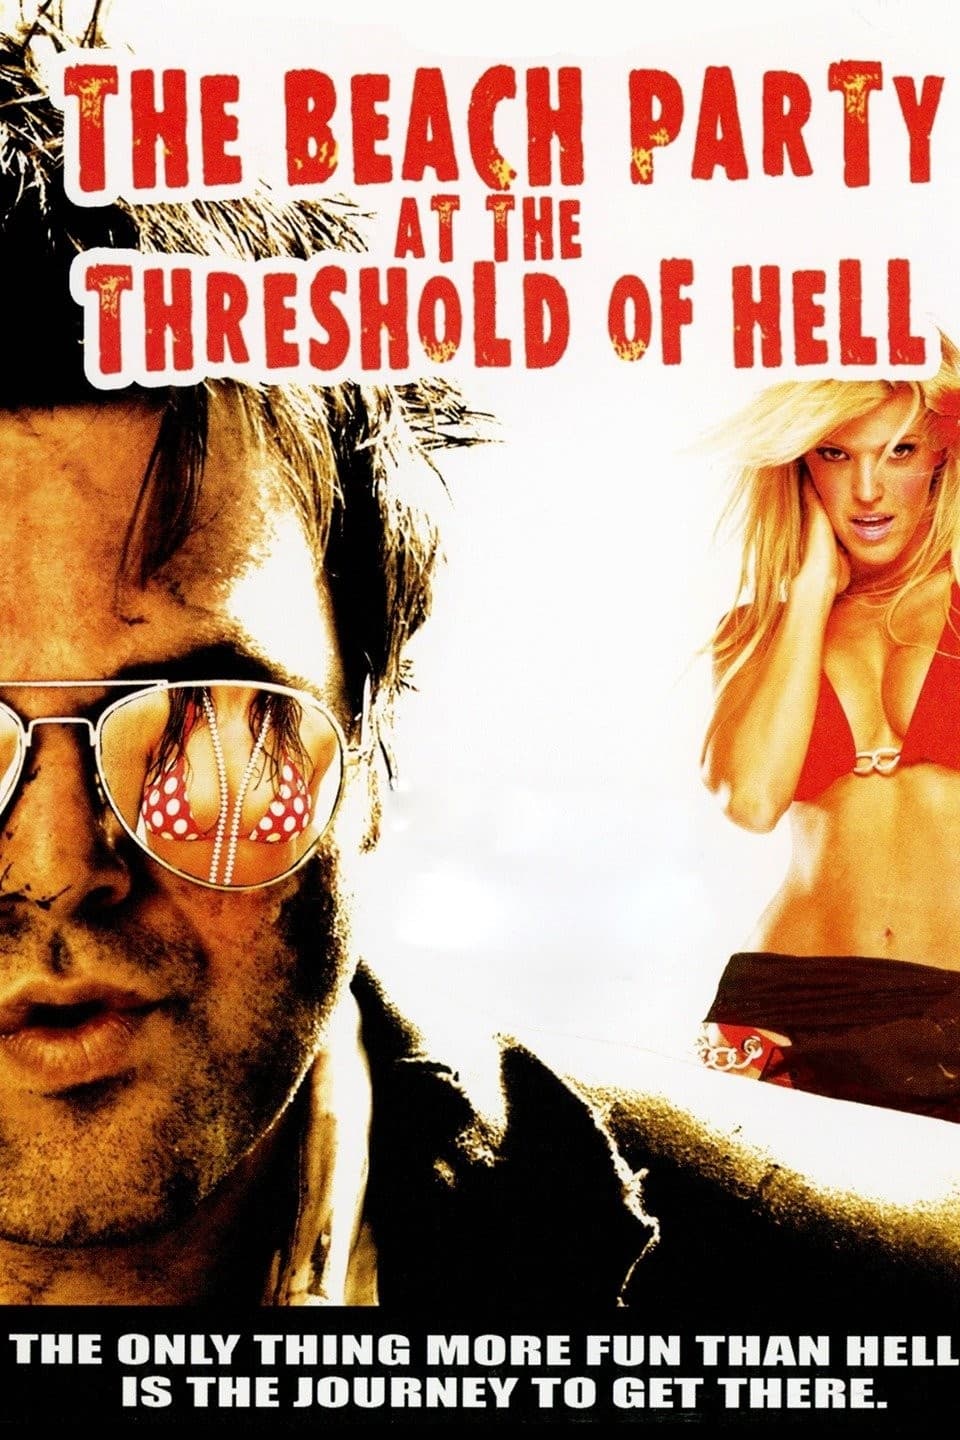 National Lampoon Presents The Beach Party at the Threshold of Hell (2006)